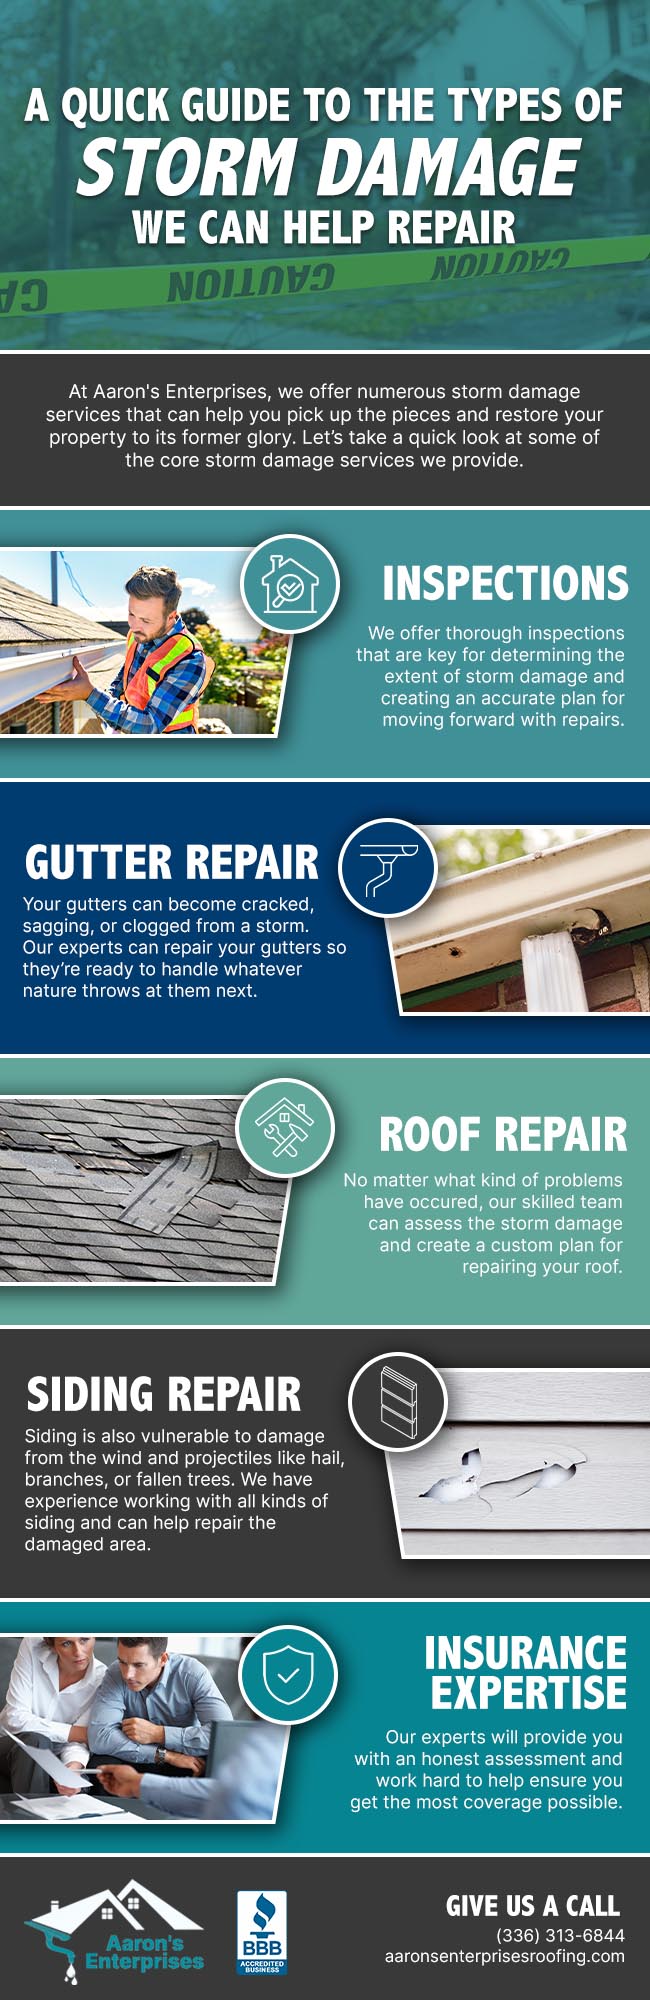 Cracked, Shaken, and Soaked: A Quick Guide to the Types of Storm Damage We Can Help Repair 